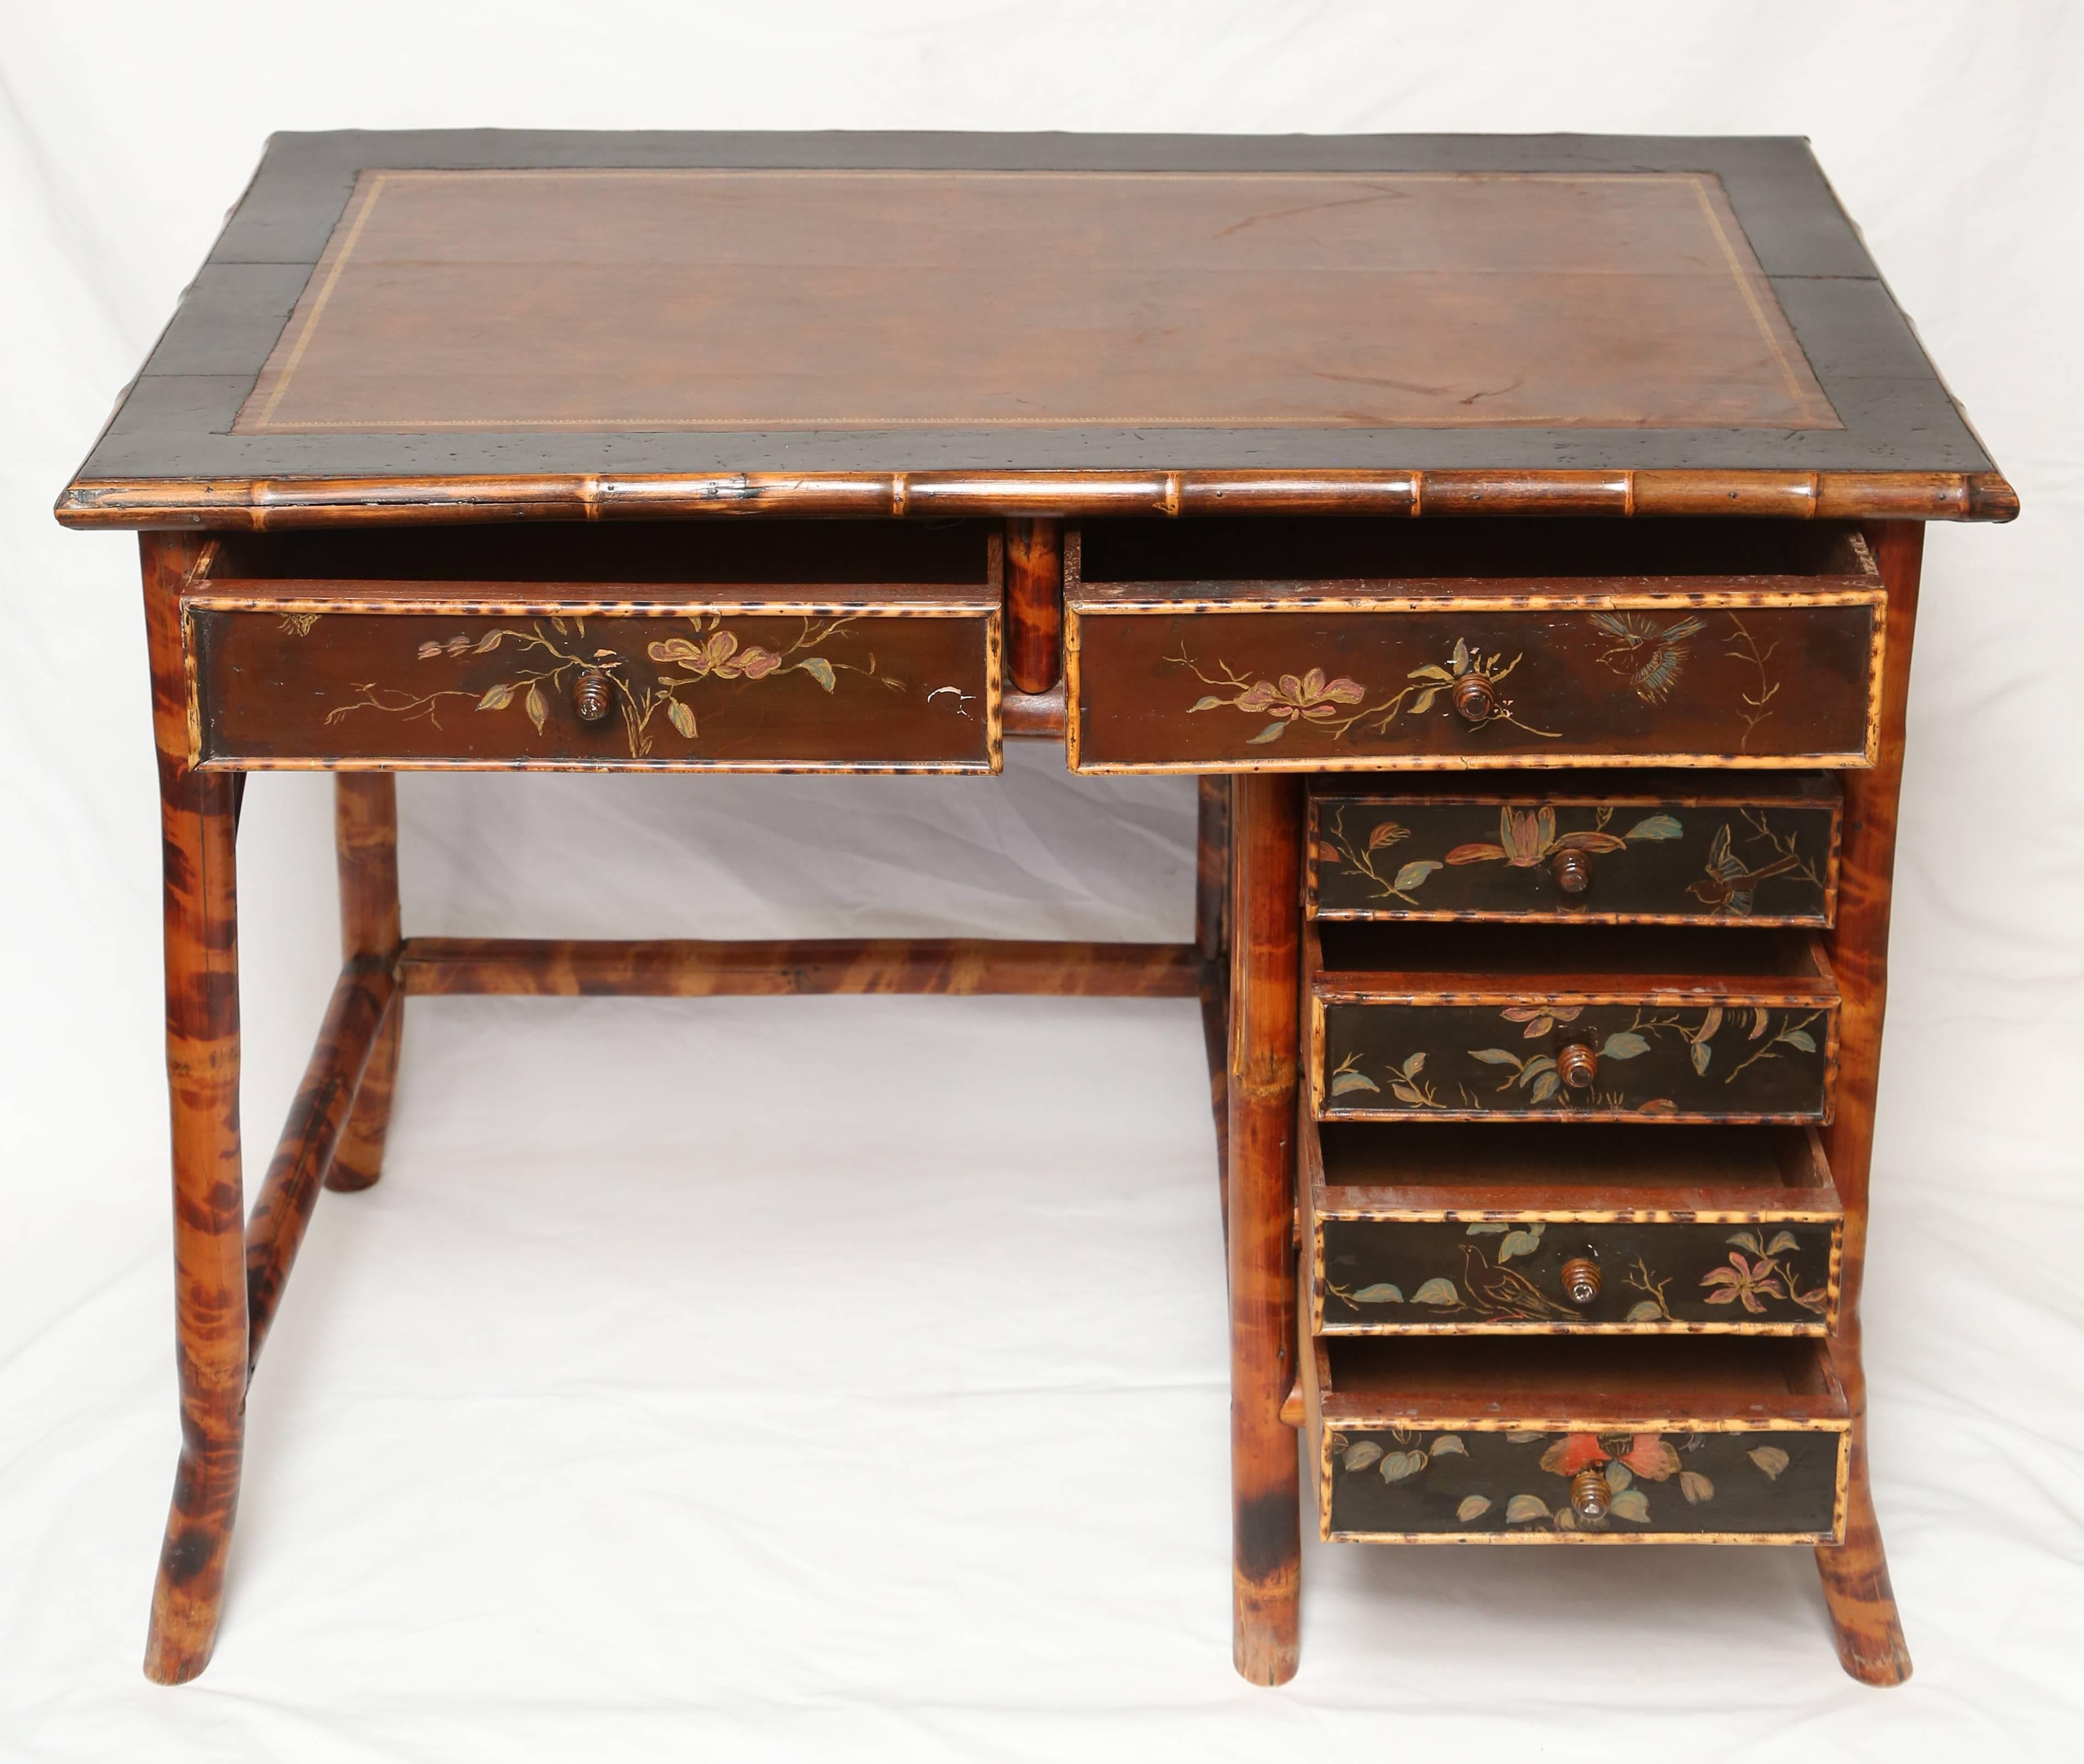 19th century English bamboo desk with hand cut dovetails, configured with two long drawers over a four small drawer cabinet, drawer panels paint and gilt decorated with birds, branches and flowers, inset leather top. Measures: 29 x 39 x 23 in.